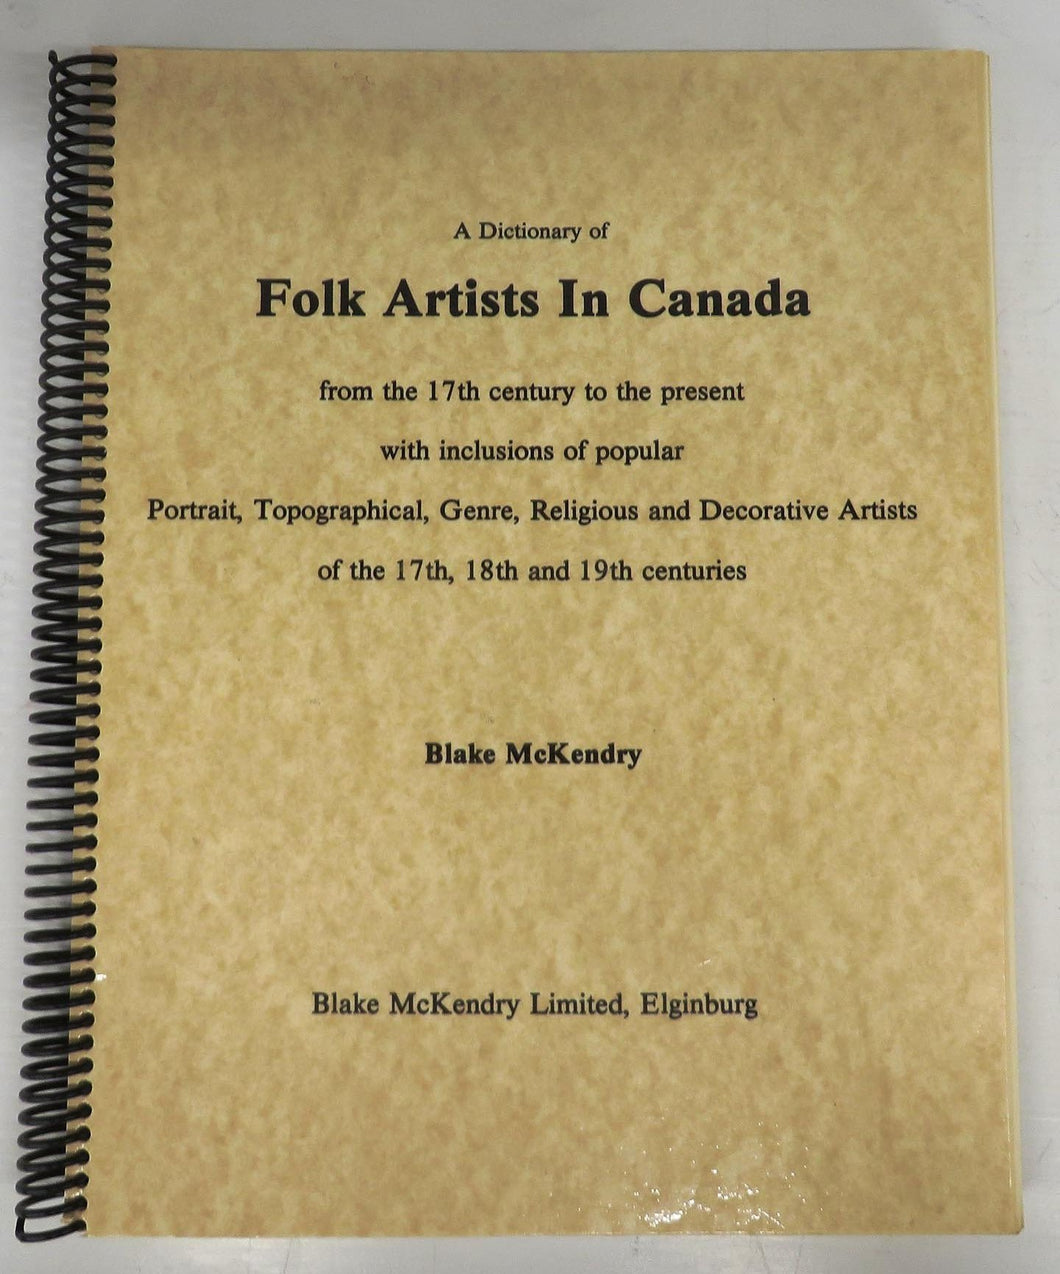 A Dictionary of Folk Artists in Canada